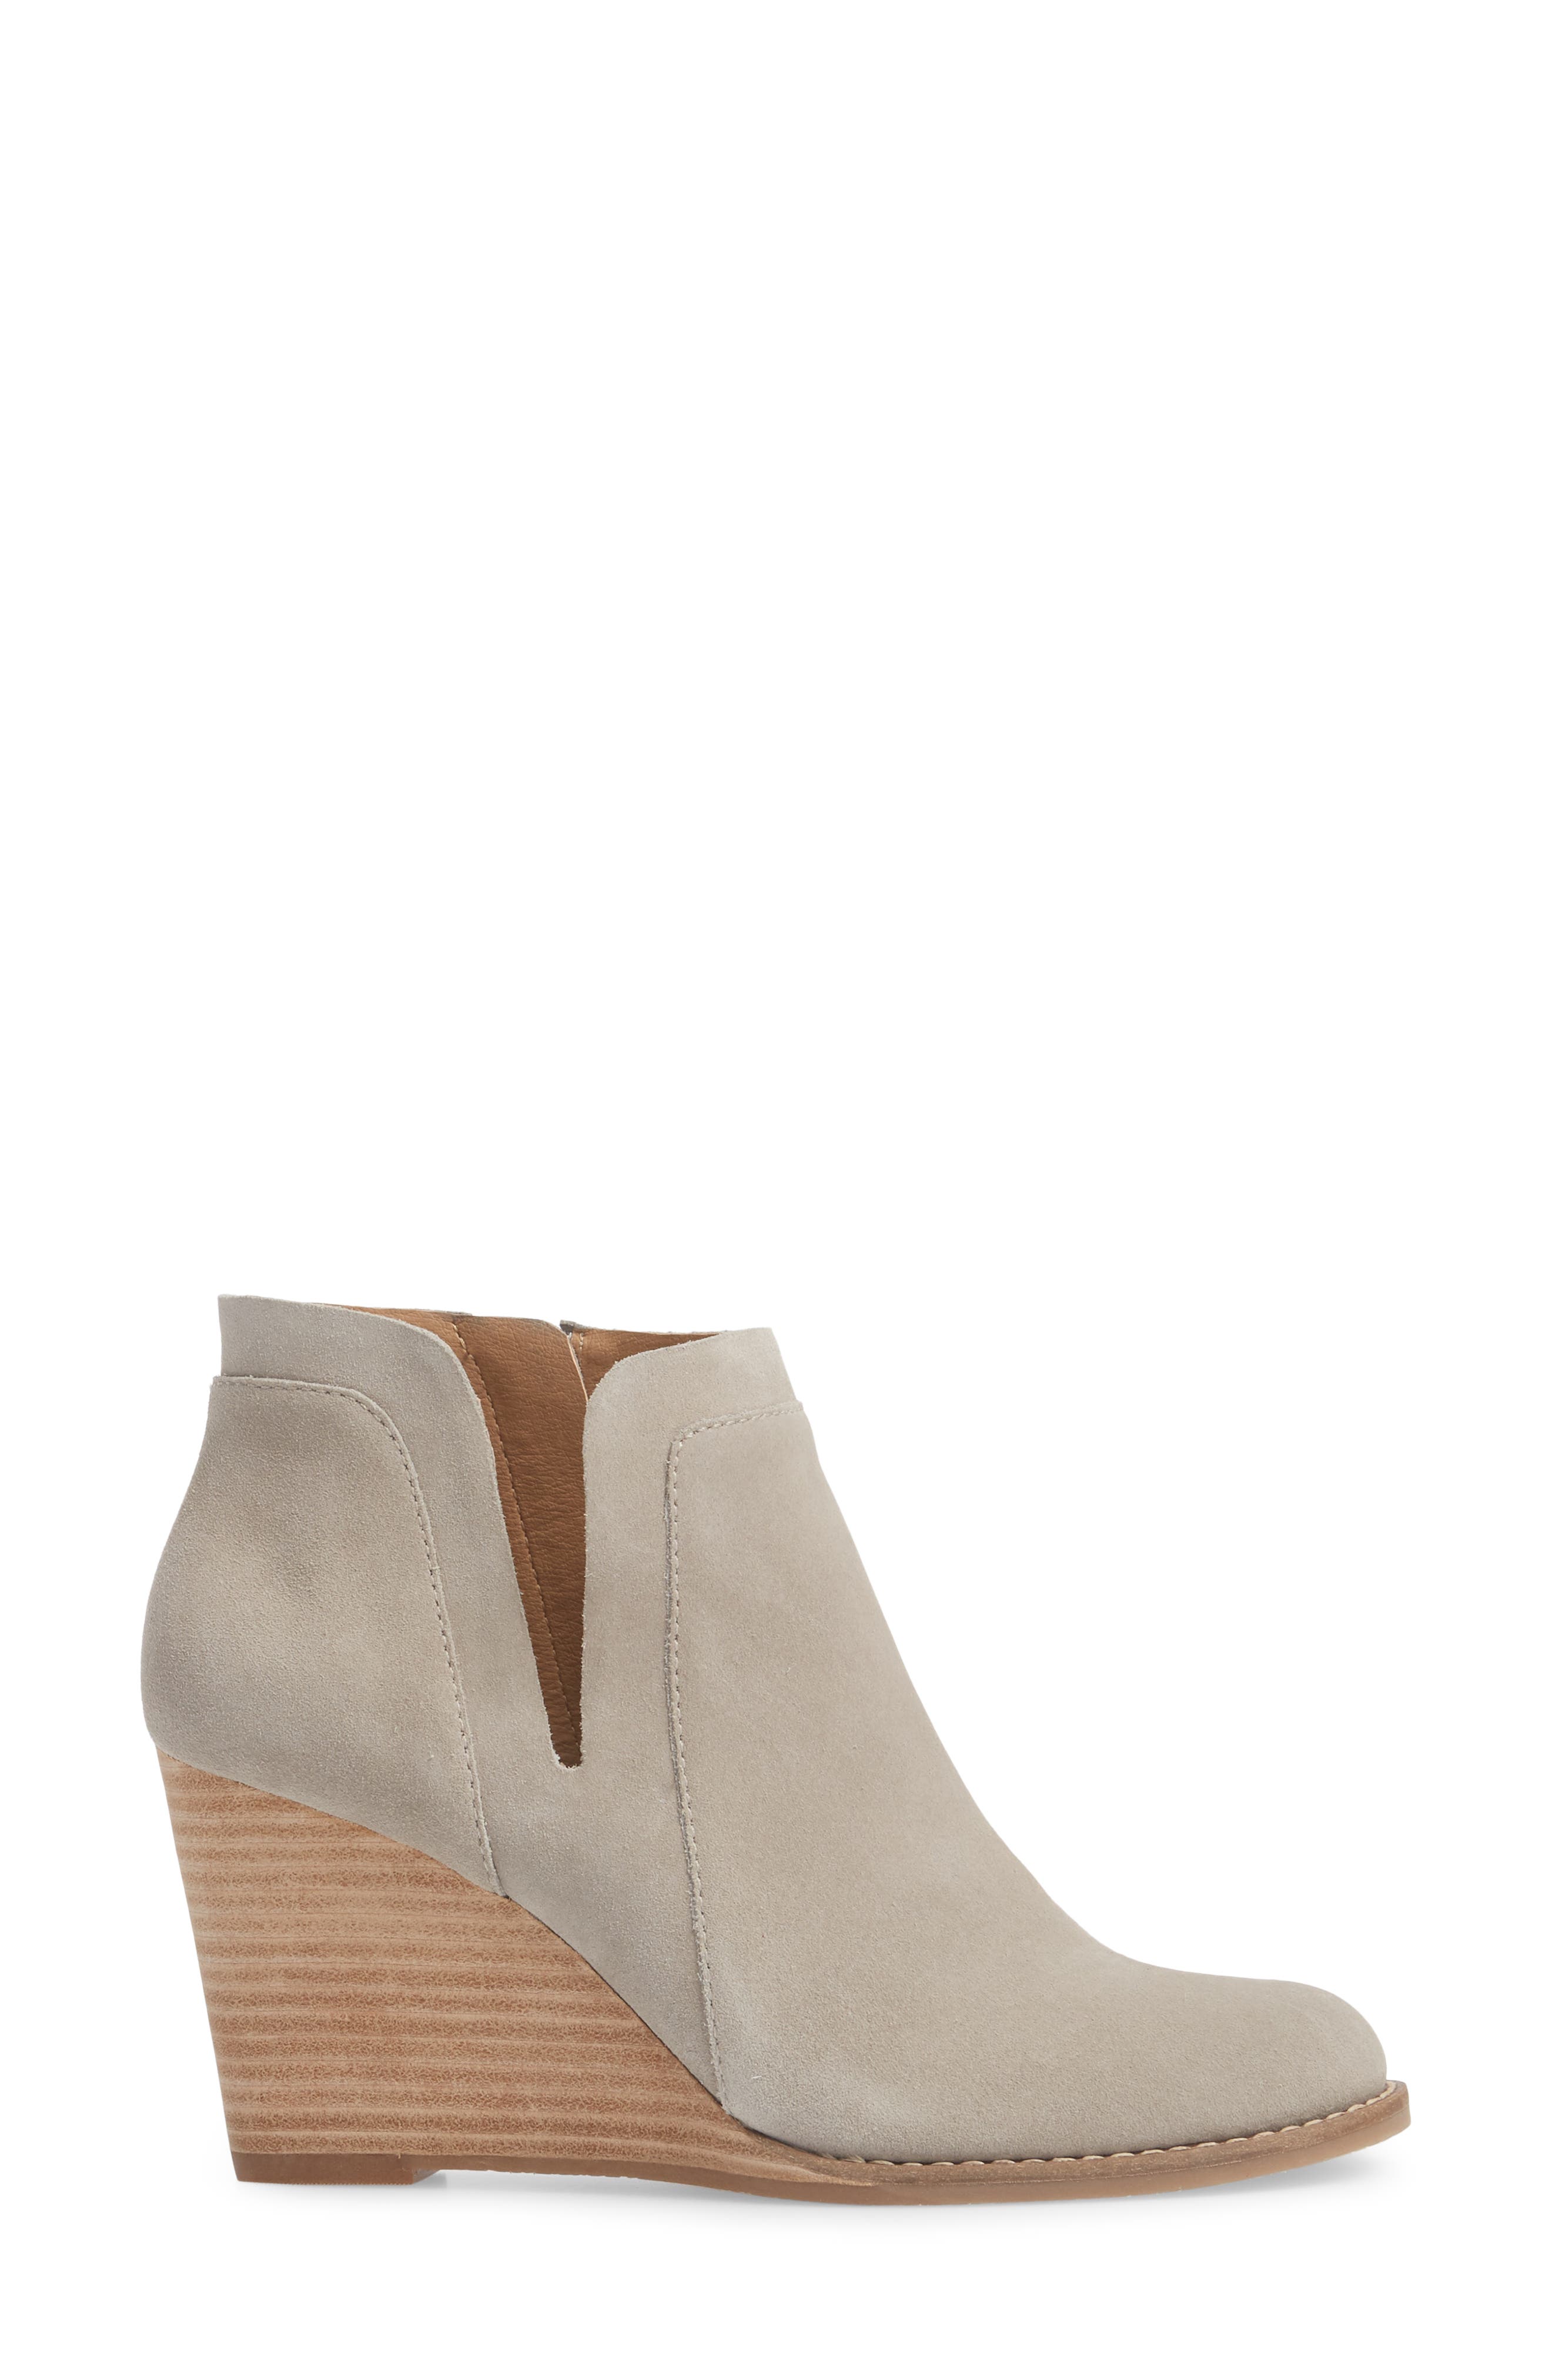 lucky yabba wedge bootie